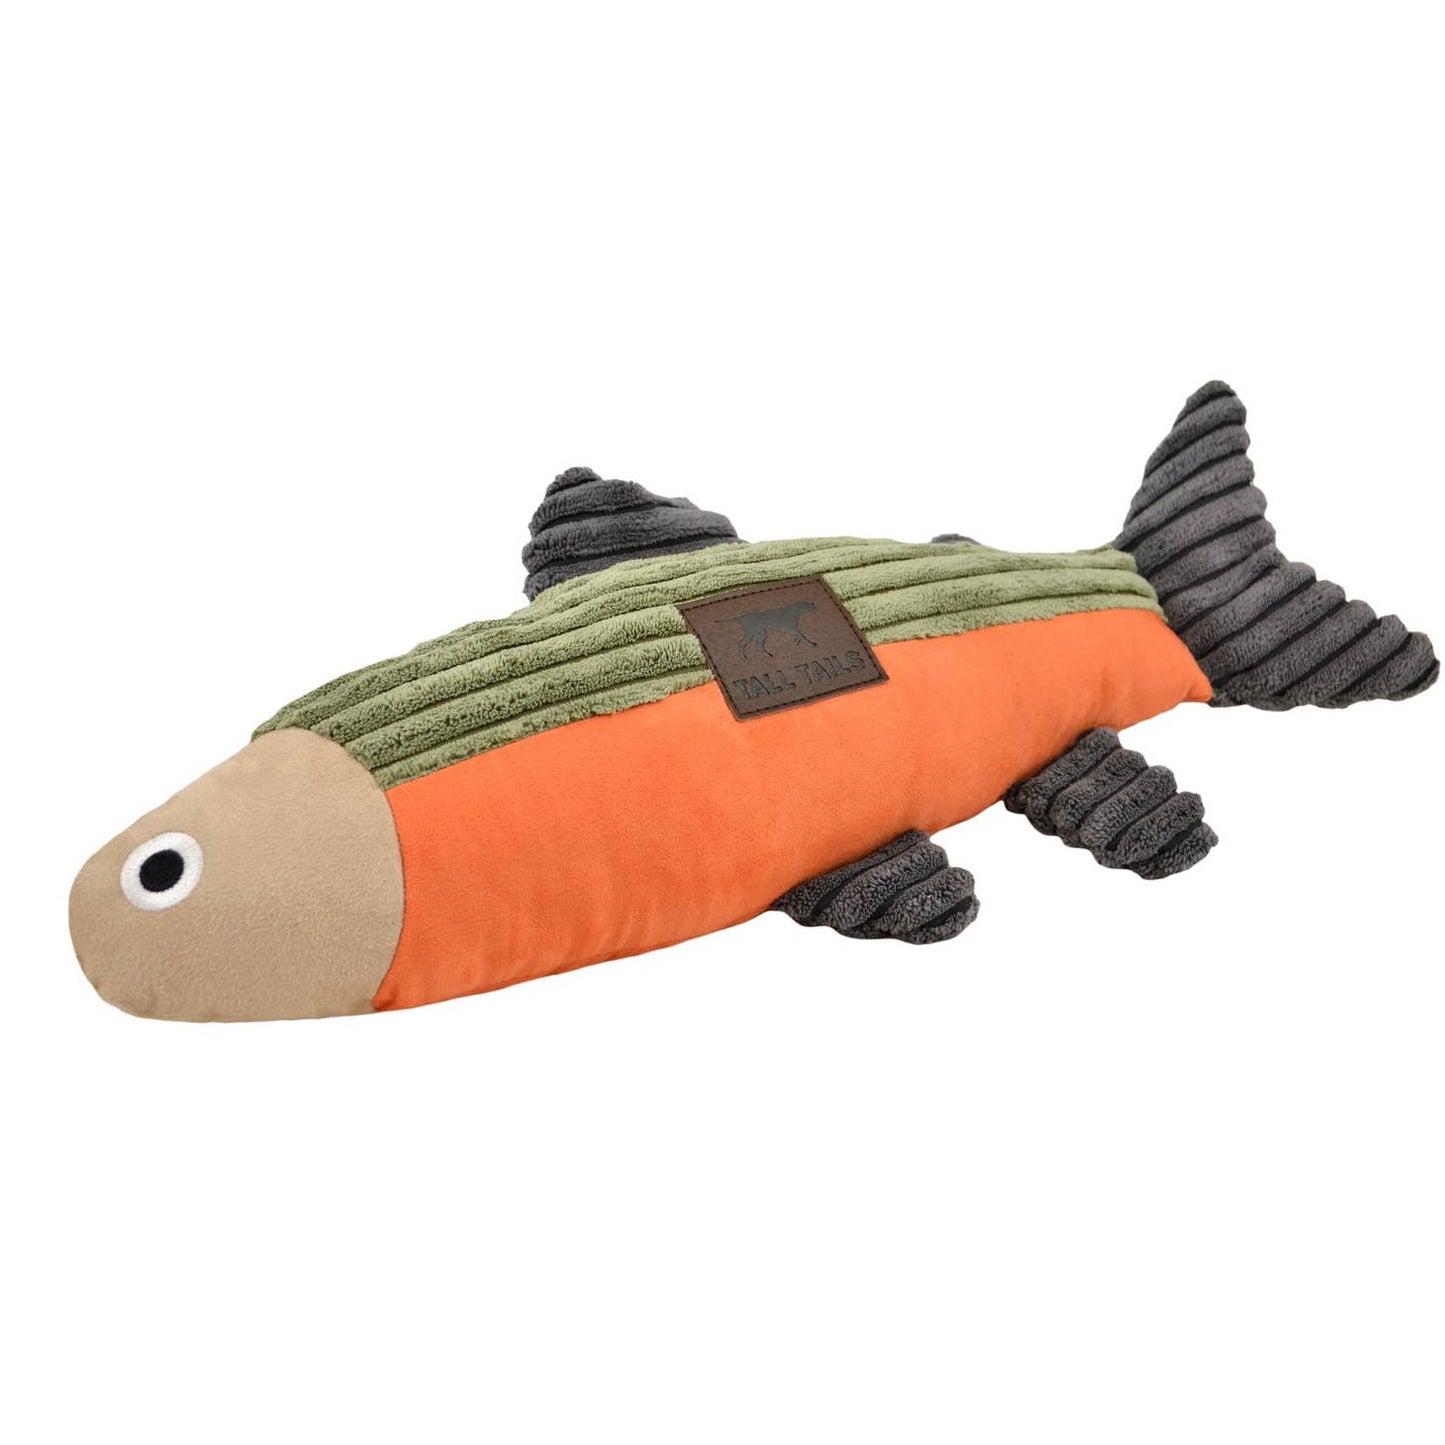 Tall Tails Plush Fish Squeaker Toy